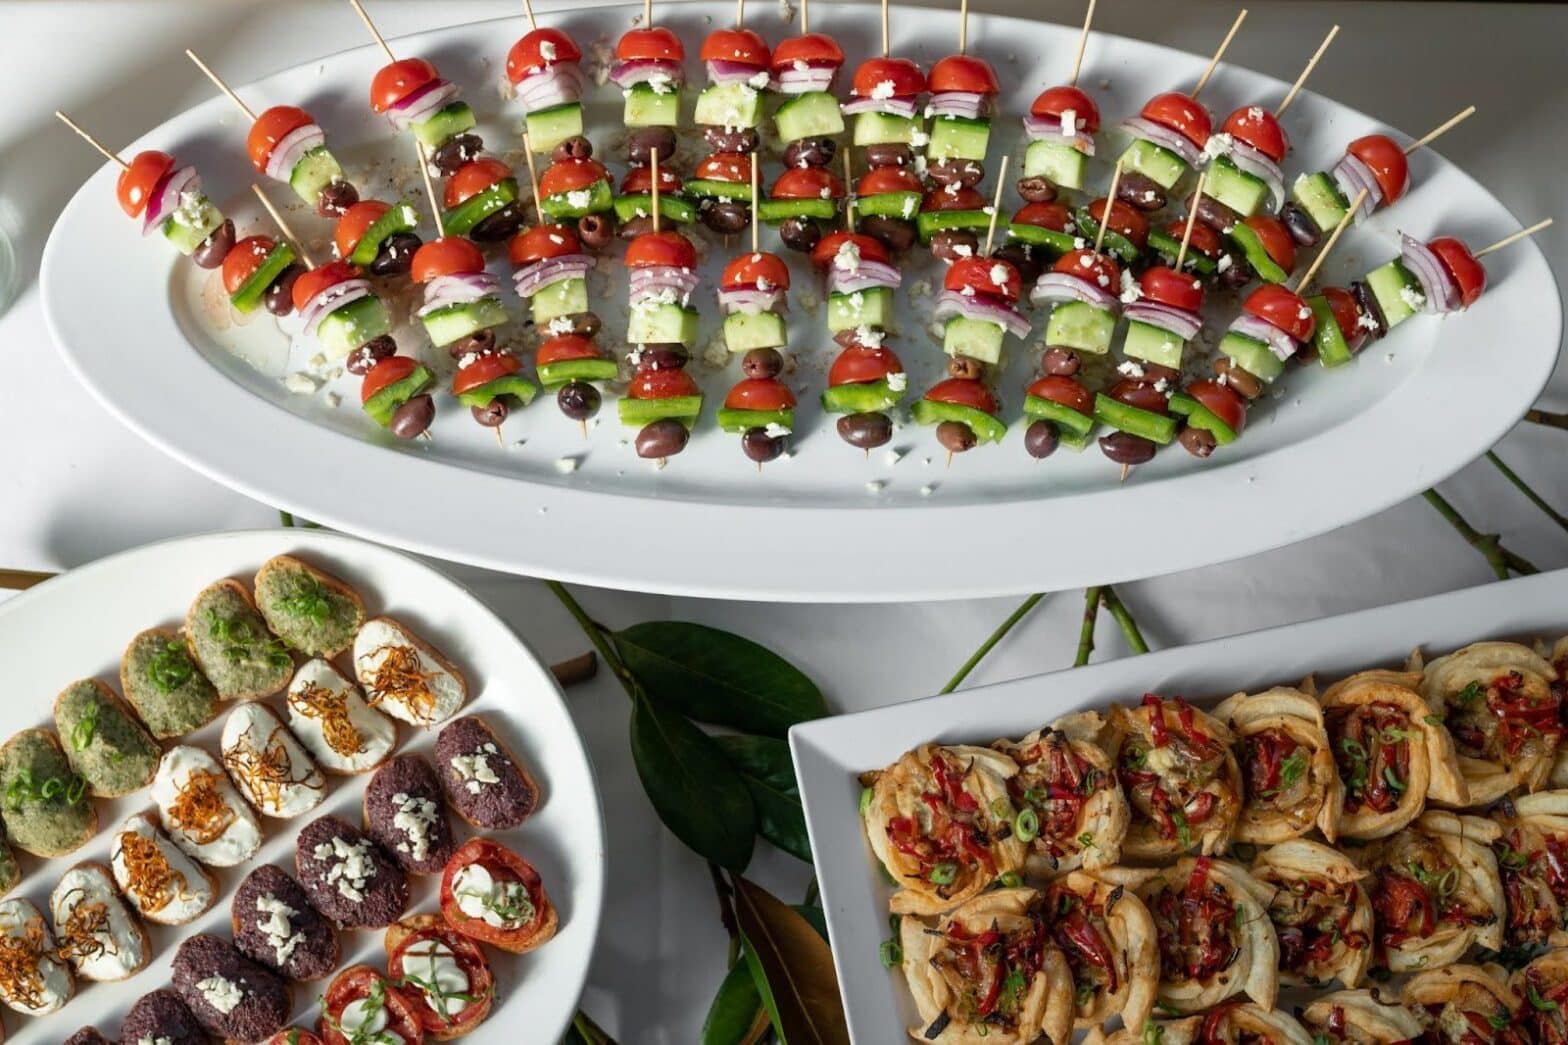 Featured image for post: Which is Best? Wedding Dinner vs. Hors d’oeuvres/Finger Food